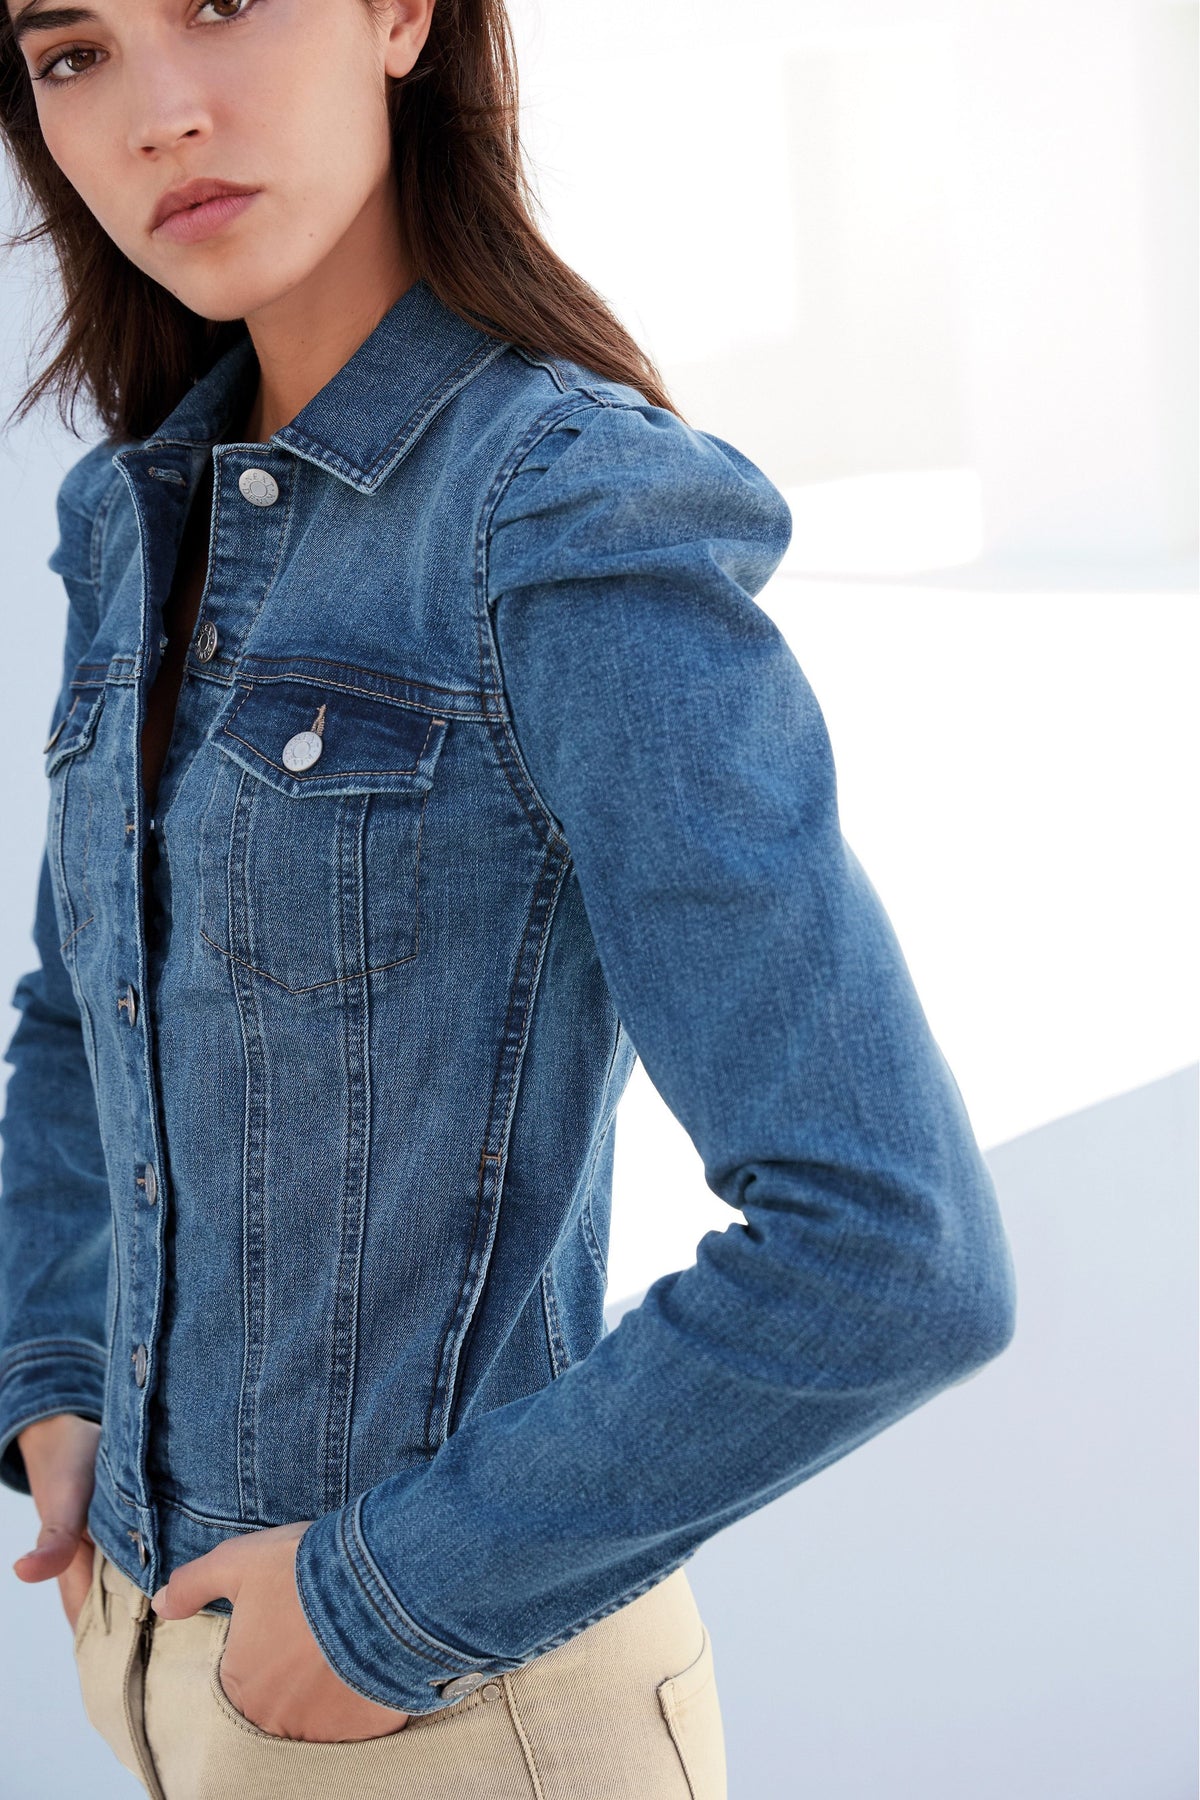 Stylish denim jacket with puff sleeves, perfect for a casual yet chic look.